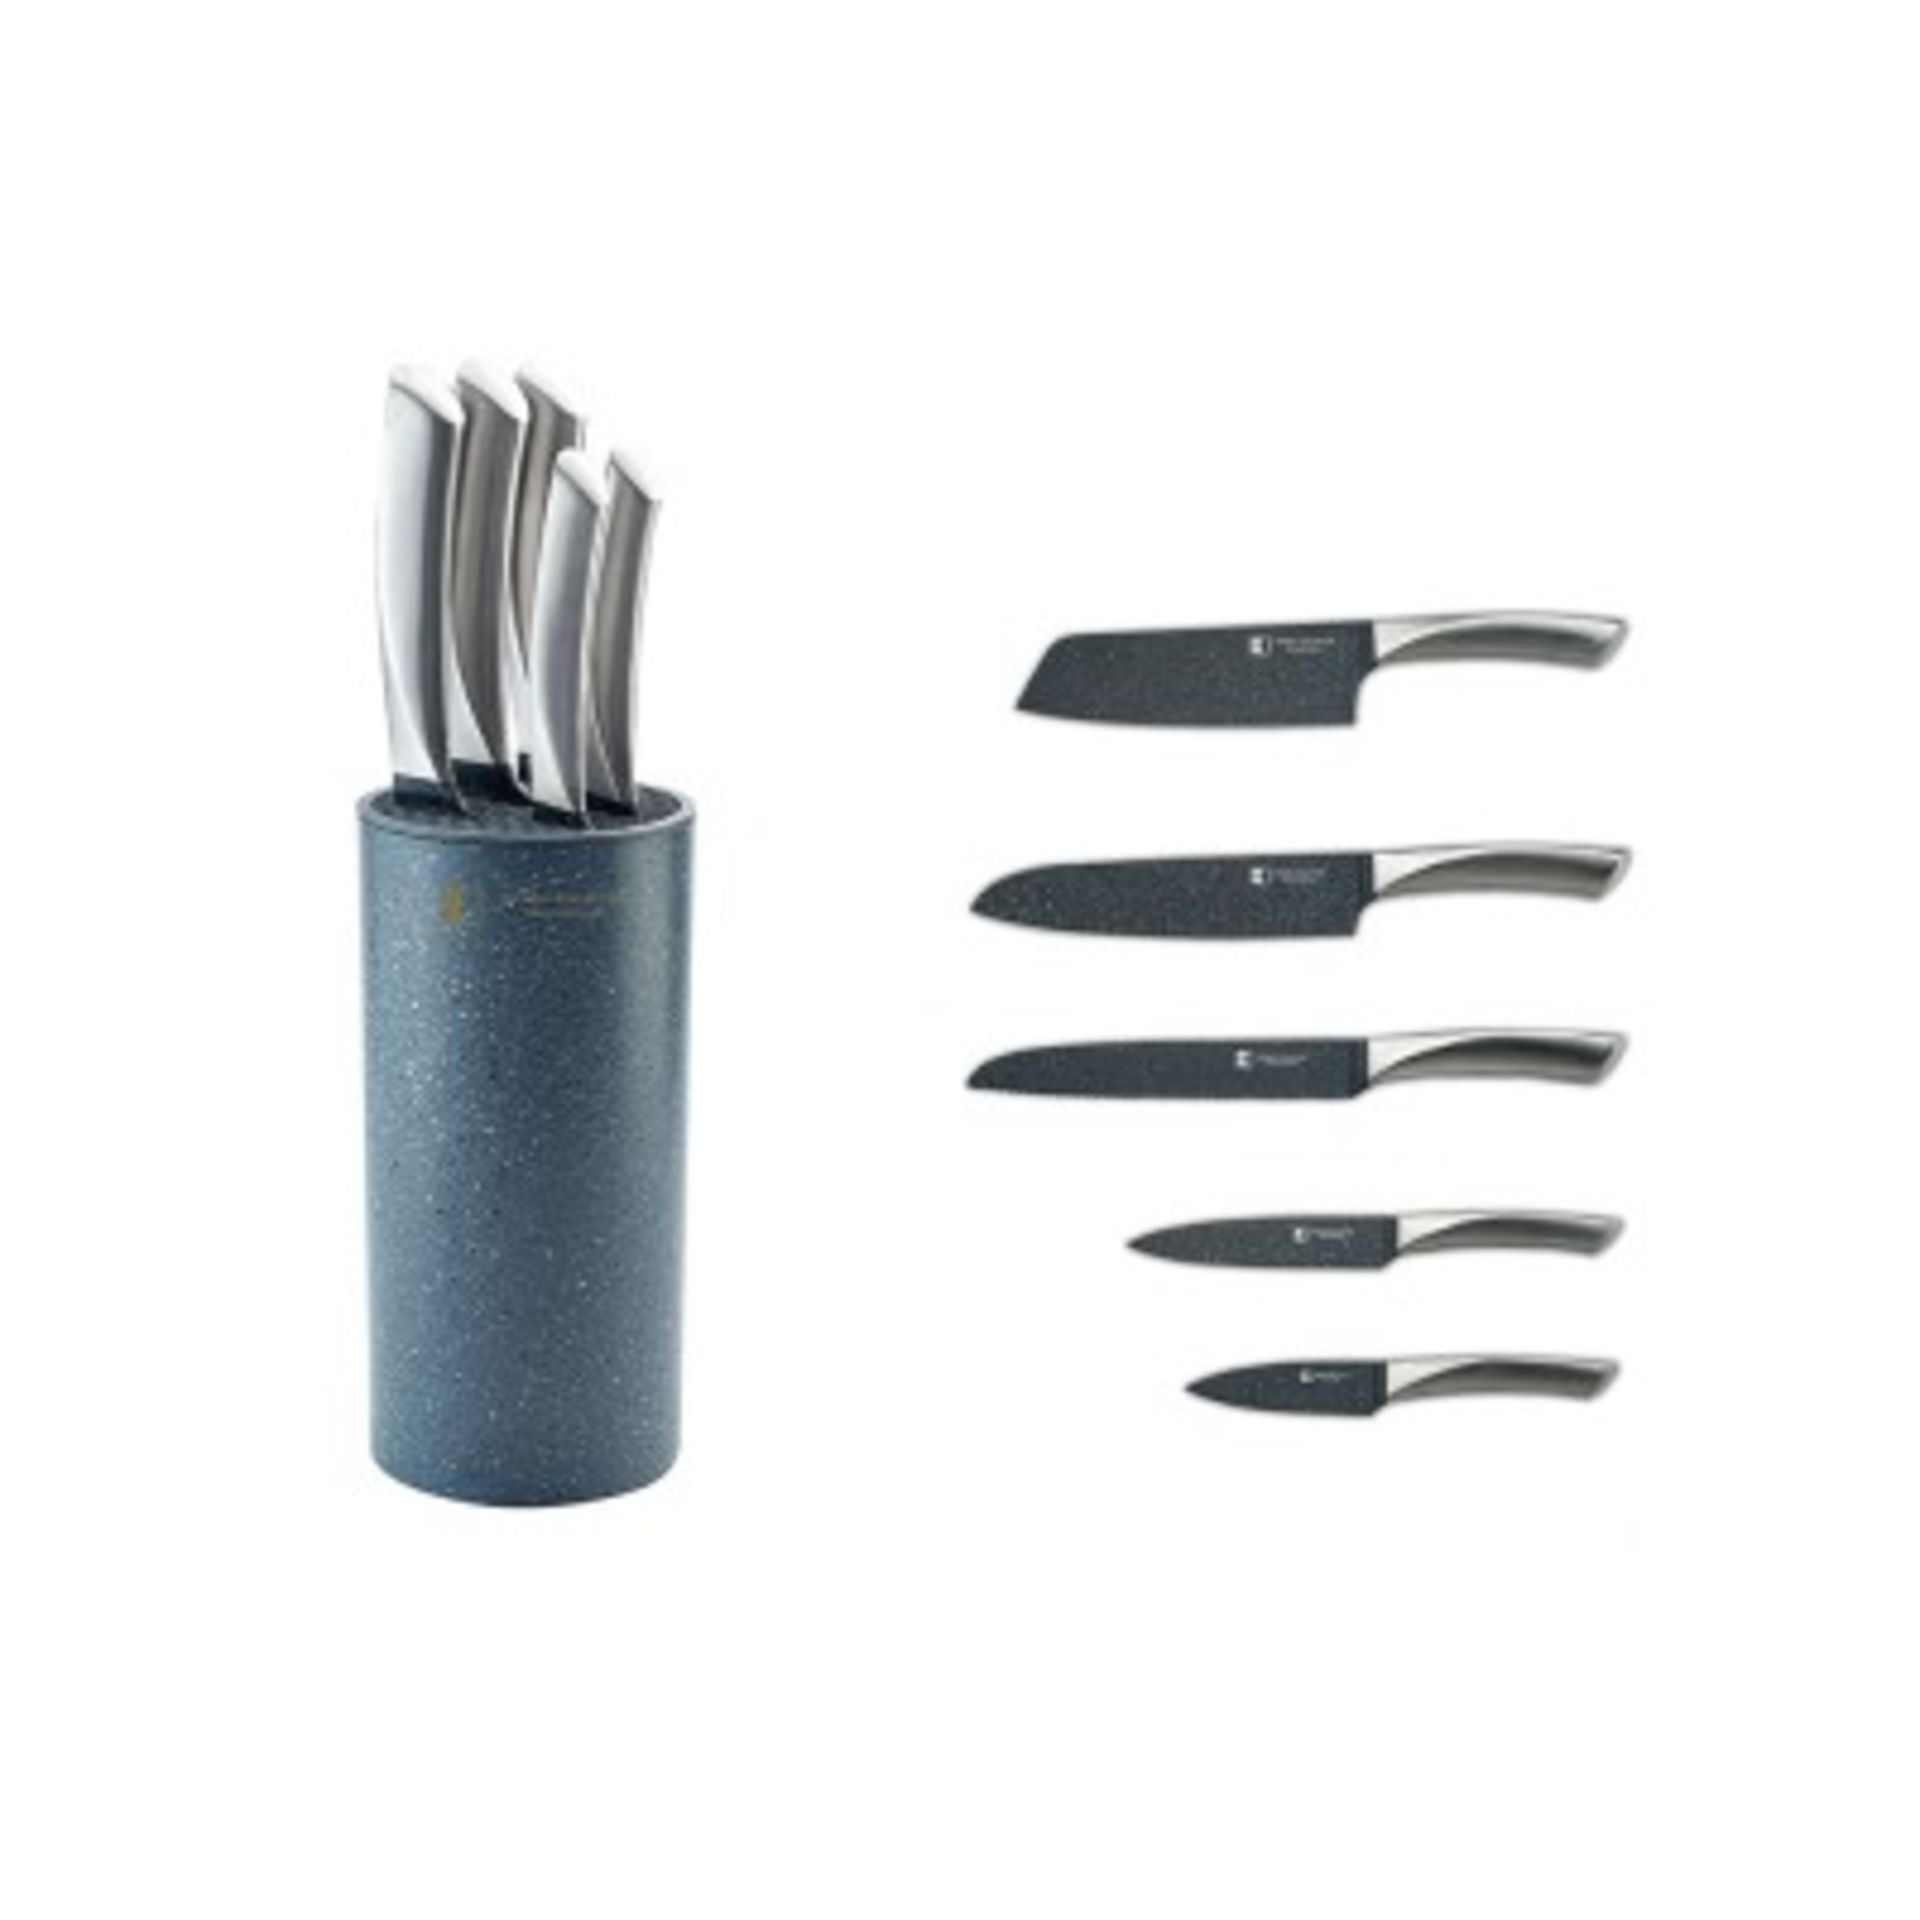 + VAT Brand New Stainless Steel with Marble coating Knife Set In grey marble stlye Holder Includes